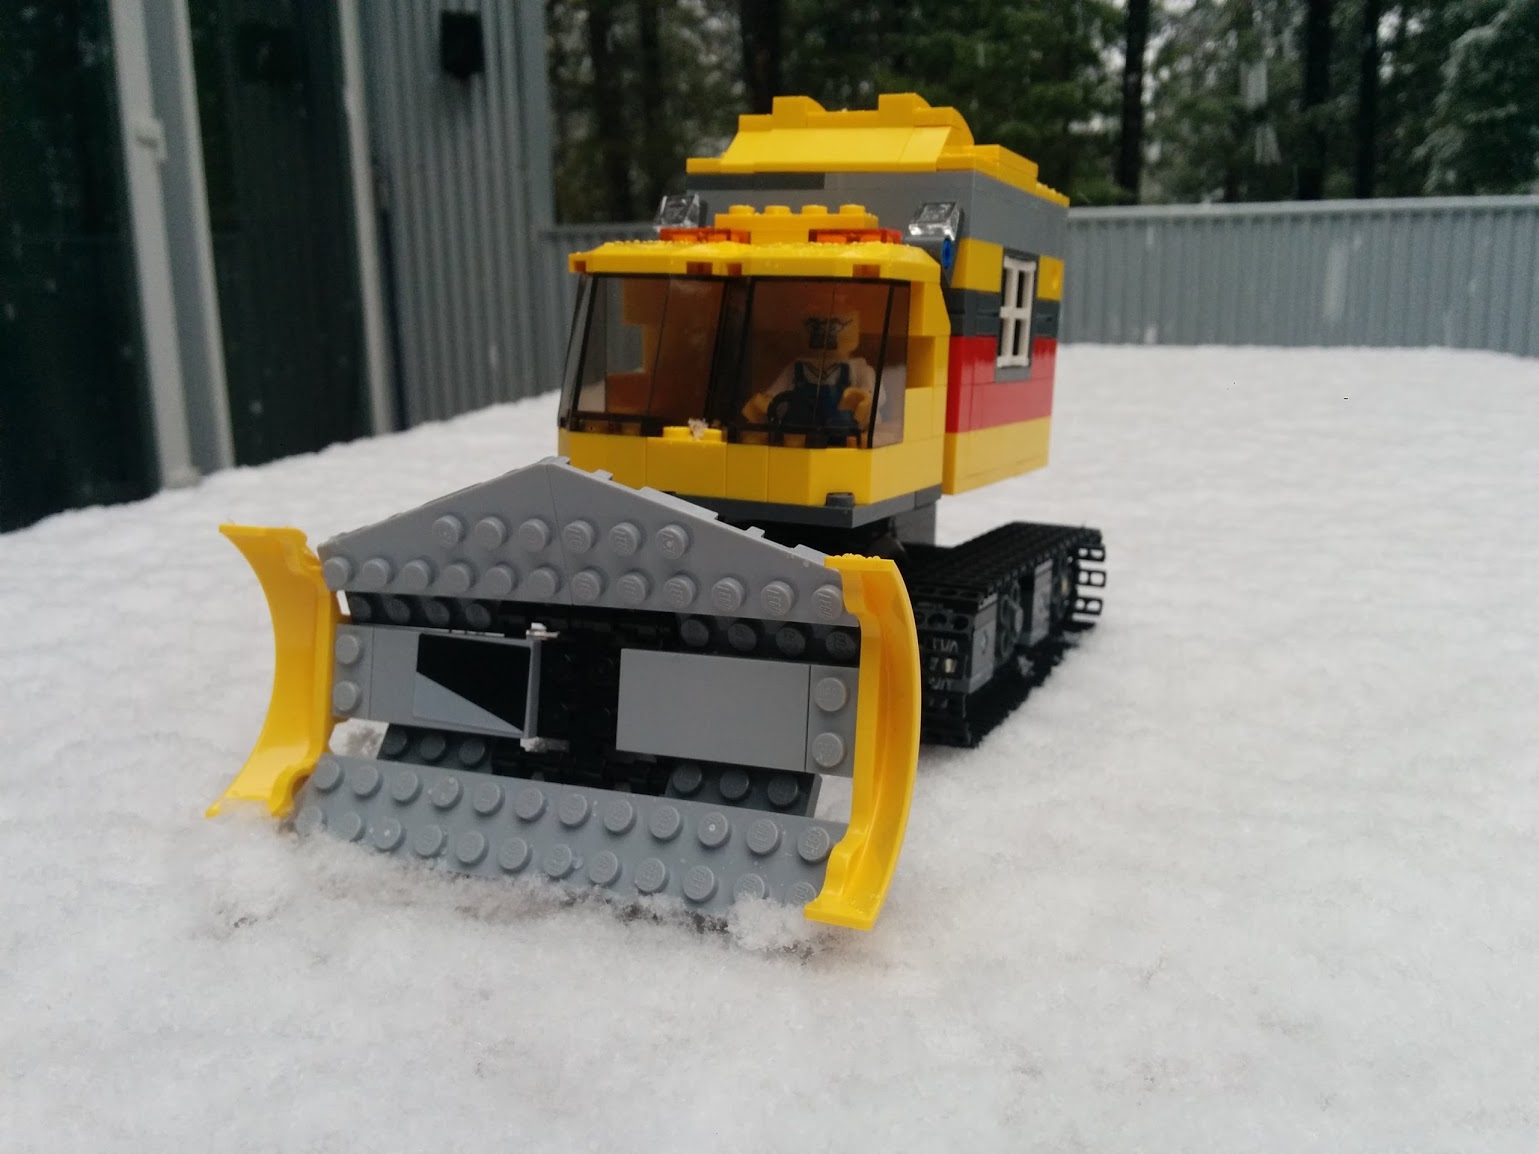 Never too old! Check out this Lego Snowcat